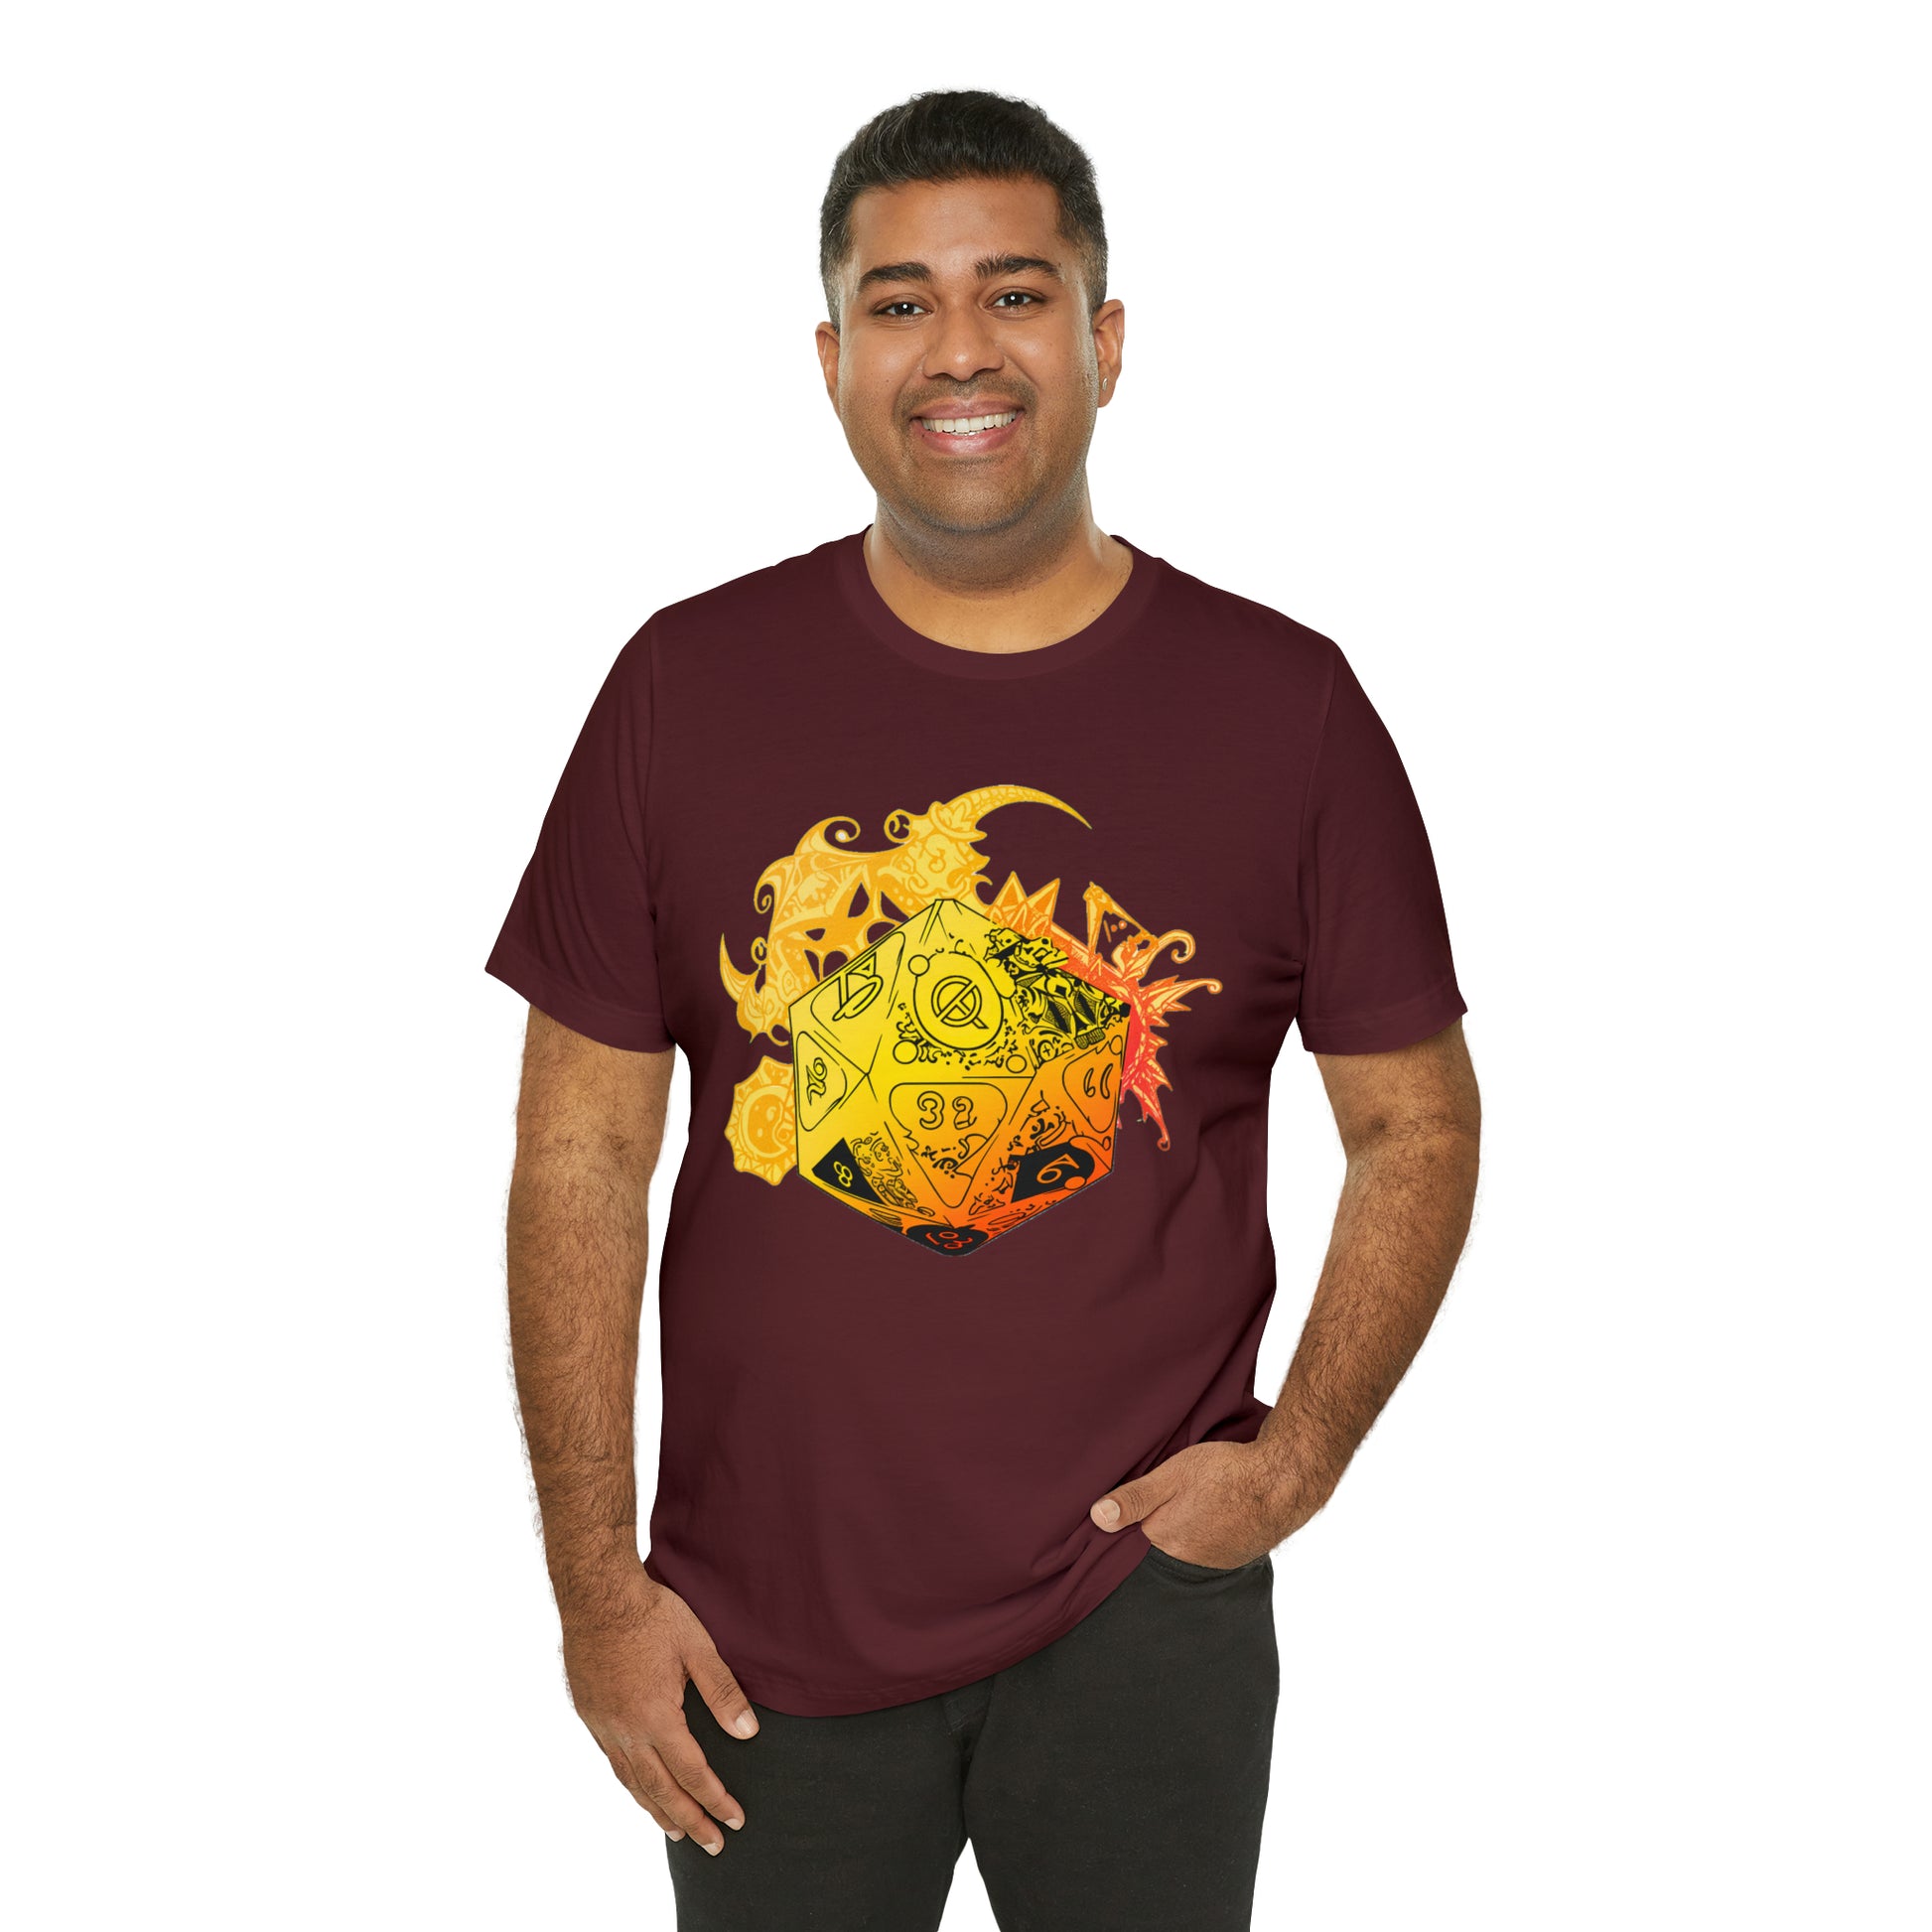 maroon-quest-thread-tee-shirt-with-large-yellow-dragon-dice-on-center-of-shirt